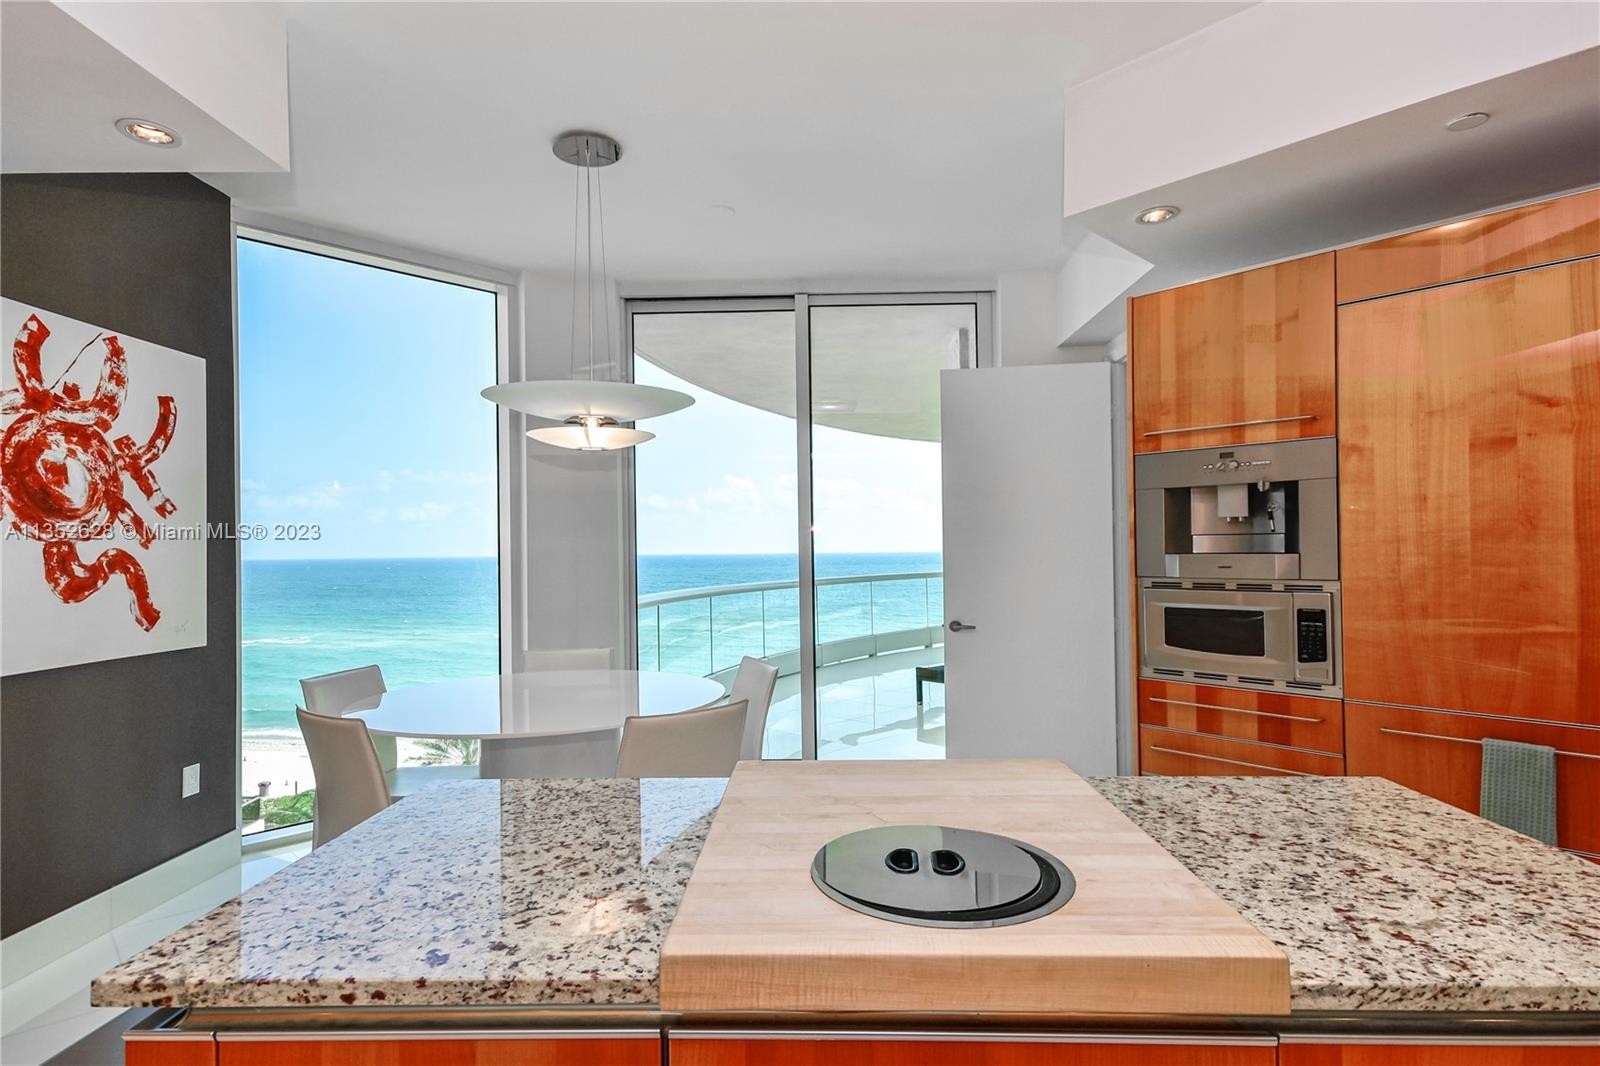 12. Condominiums for Sale at 16051 Collins Ave, 704 Sunny Isles Beach, FL 33160